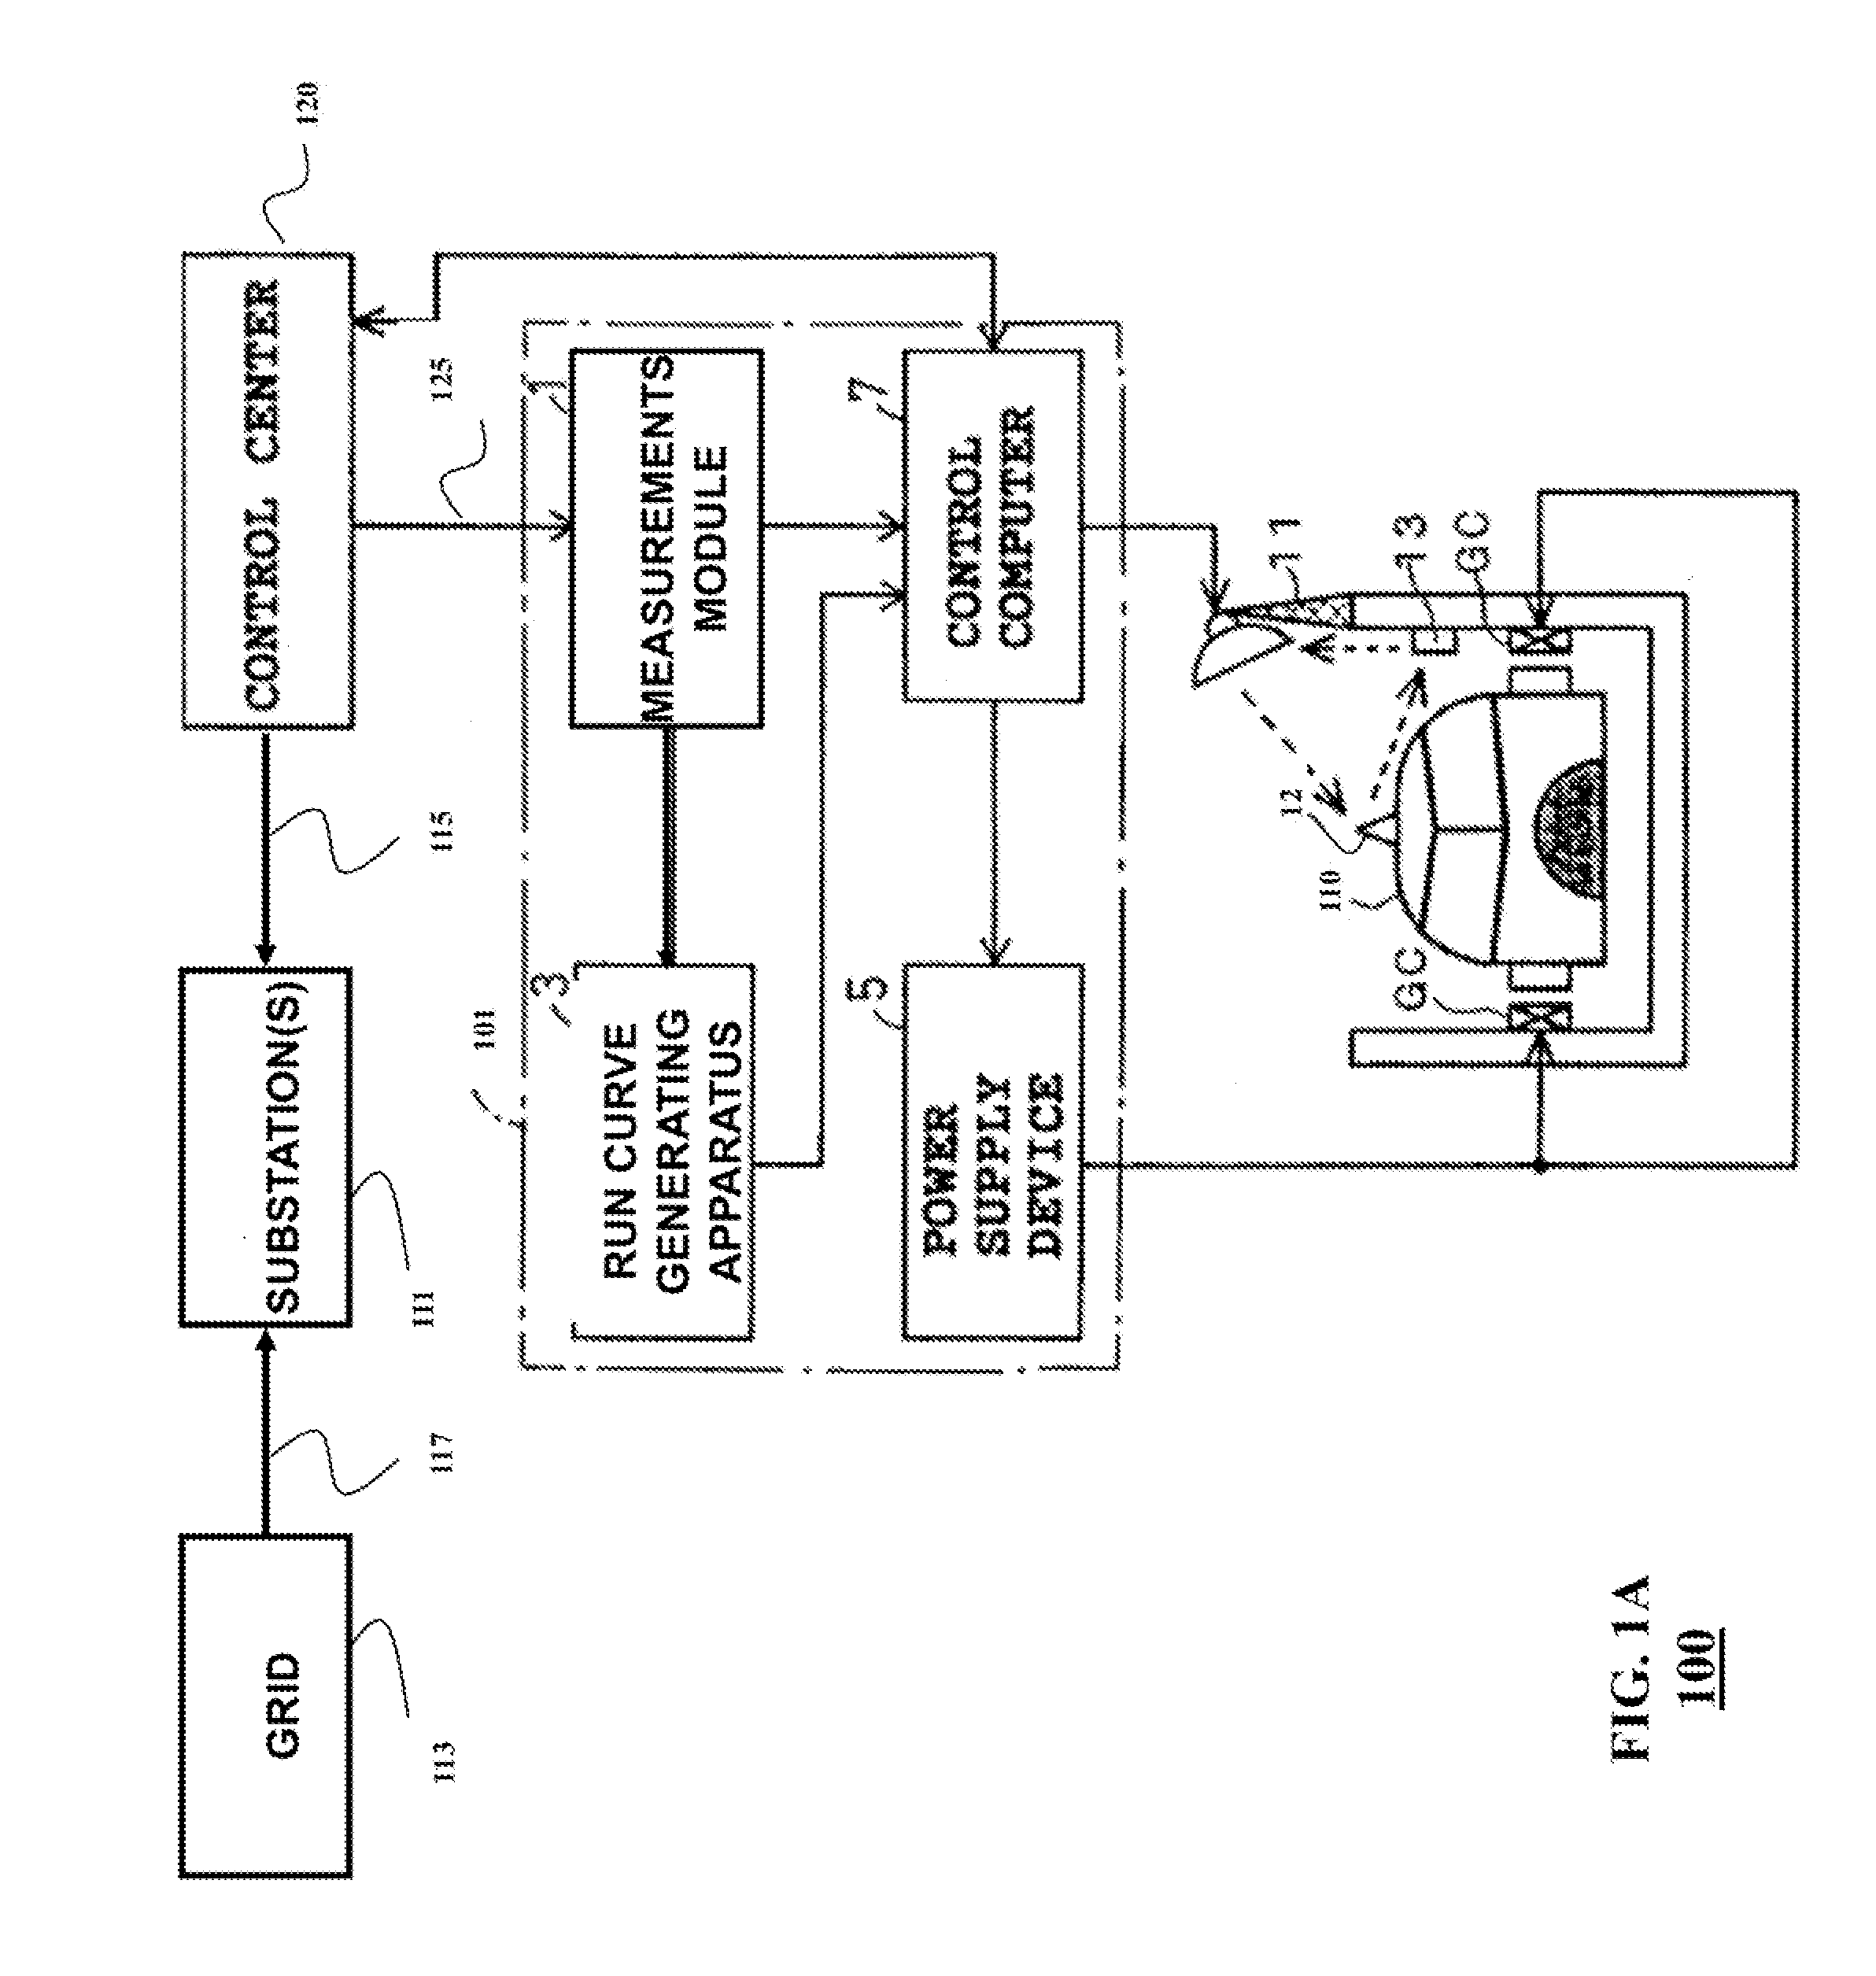 System and method for optimizing energy consumption in railway systems